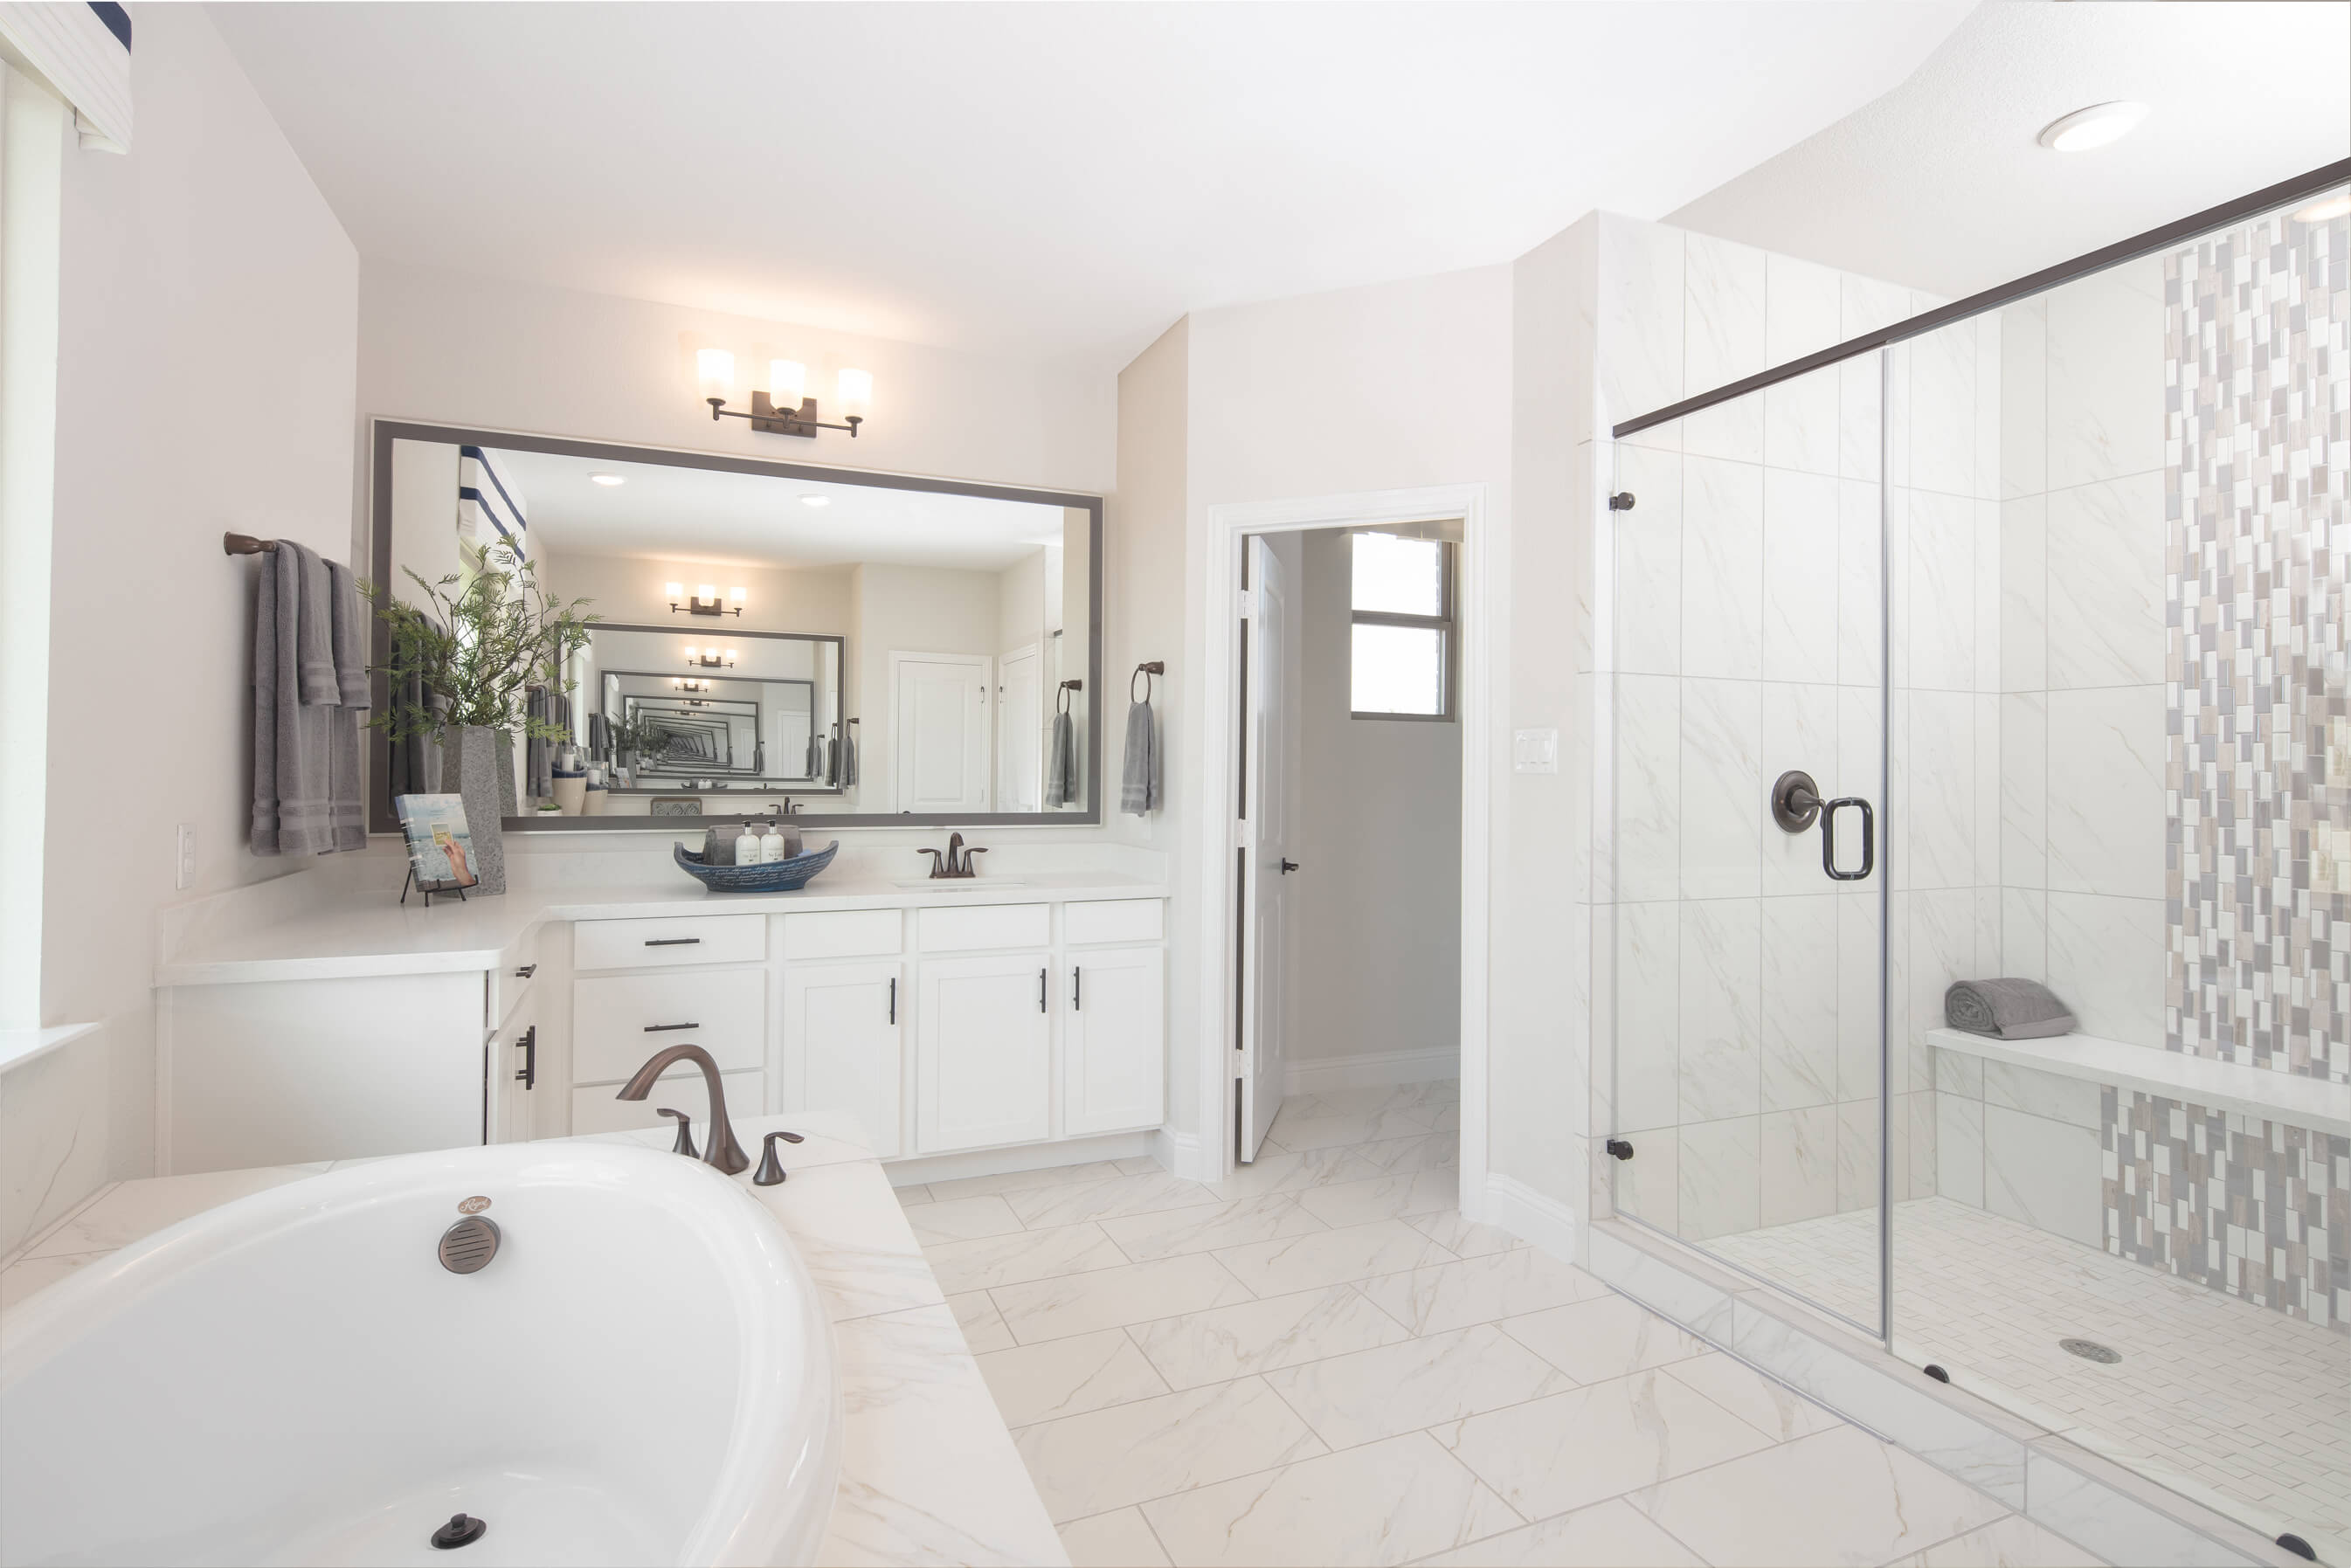 Built-In or Freestanding Tub? If you can't make up your mind, tour a Taylor Morrison model home like this one in person to see which you prefer. 